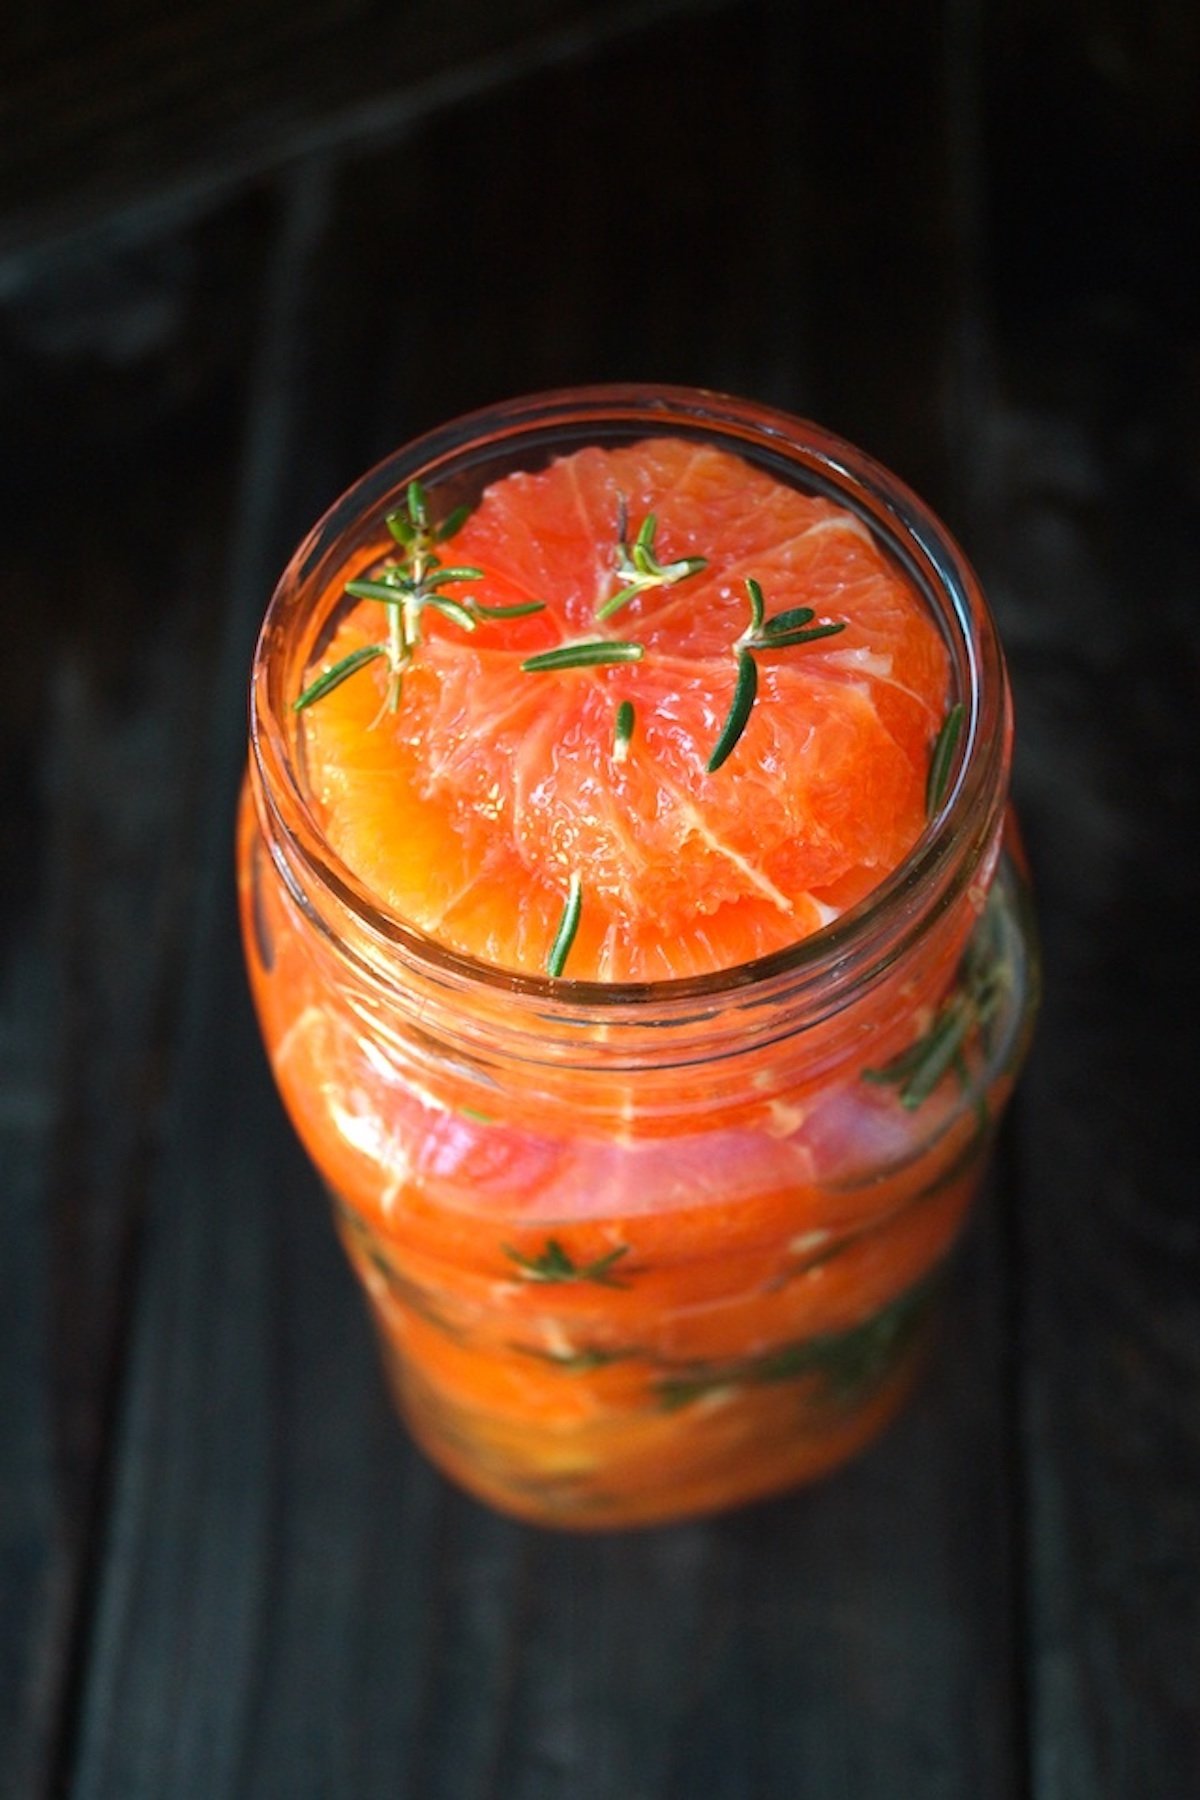 Top view of an open jar filled with pink-orange orange slices with rosemary.